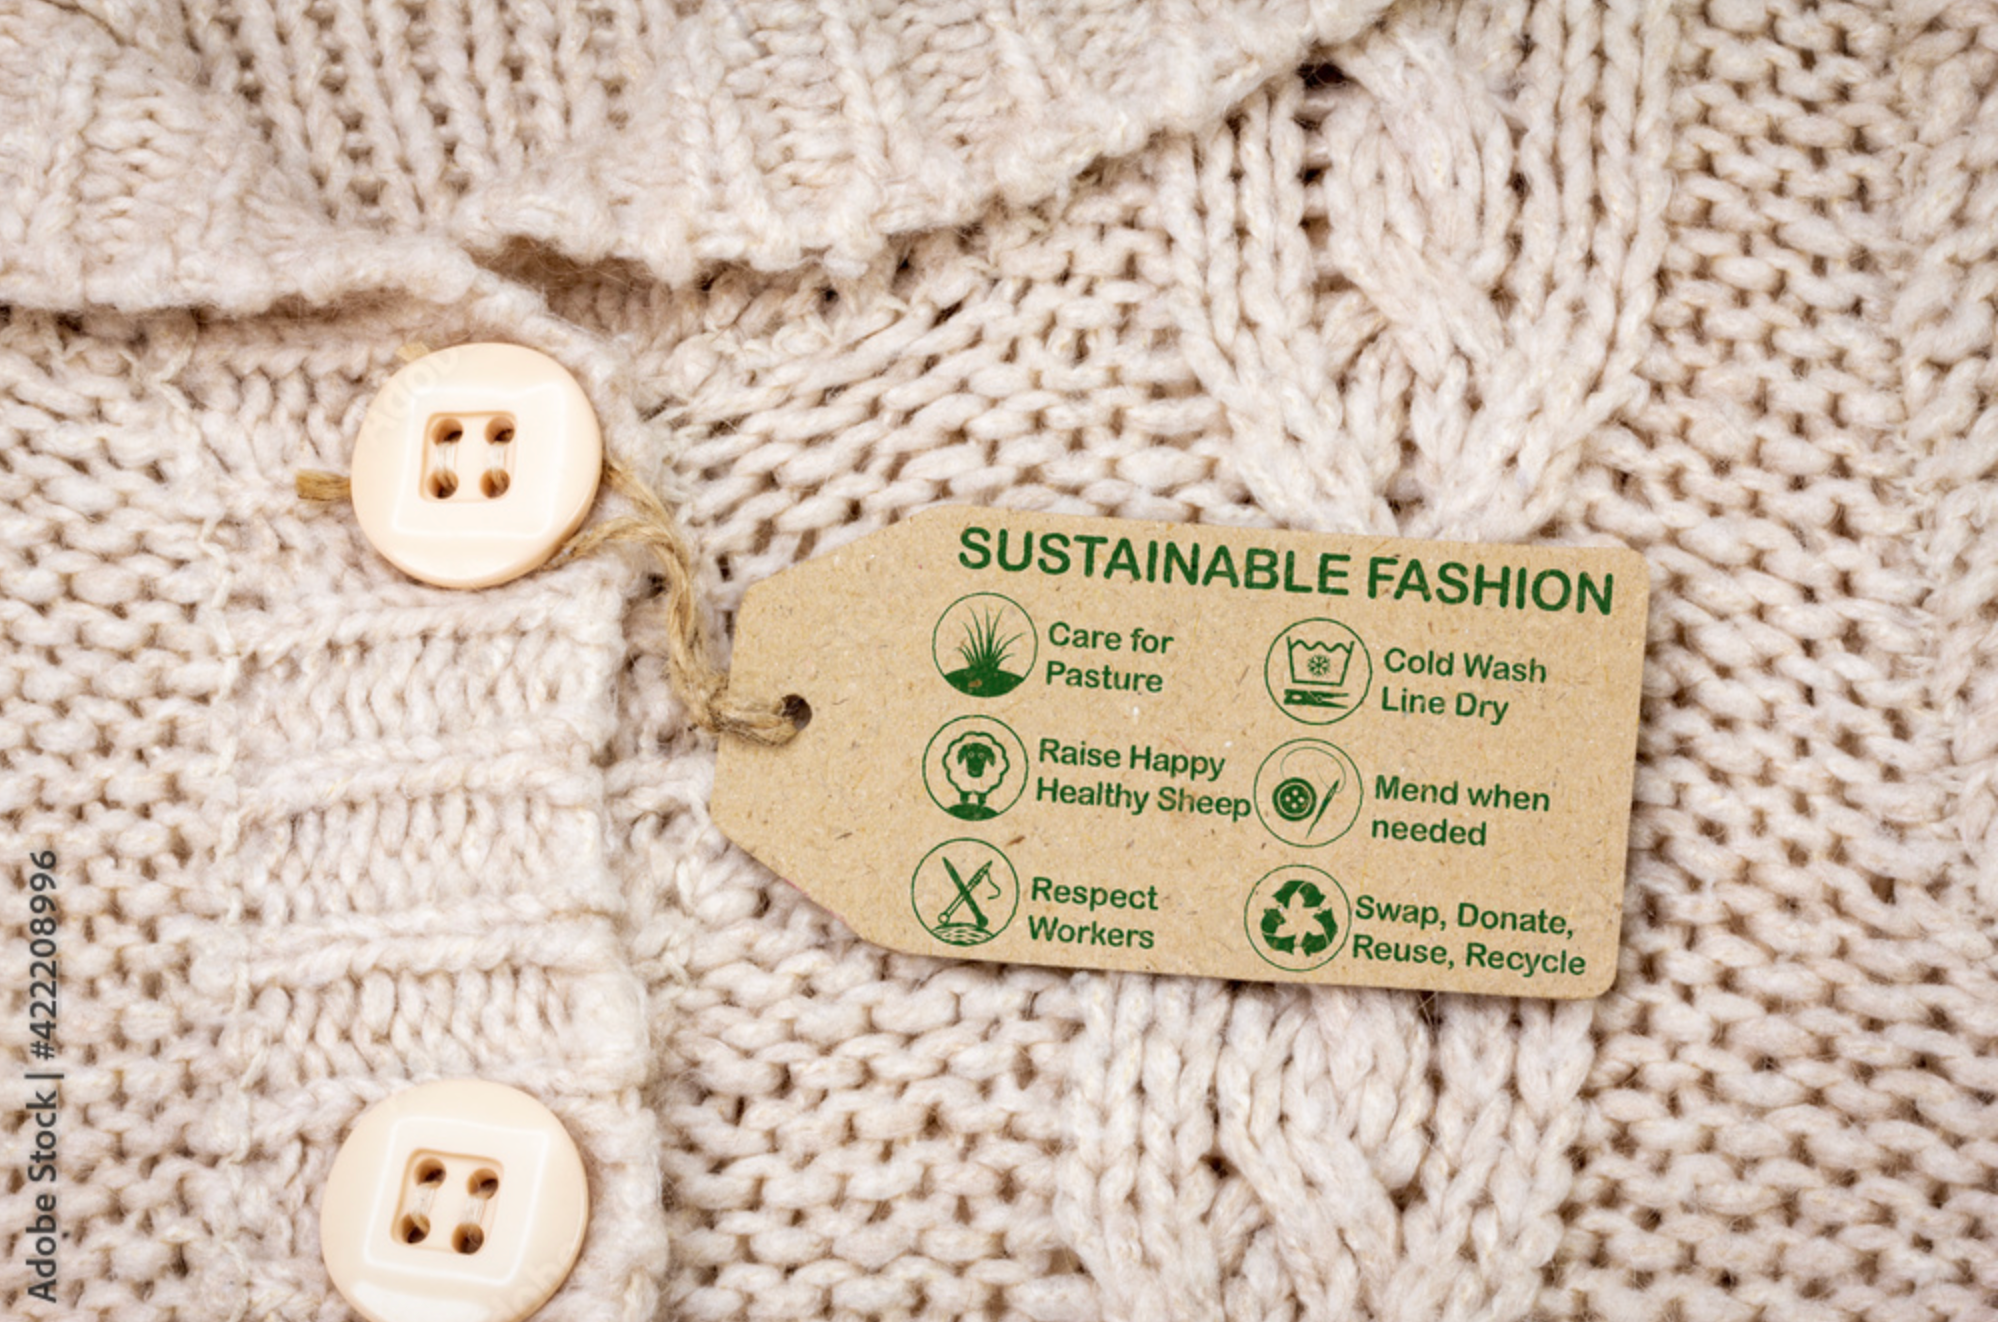 Closeup image of a sweater with a tag that says Sustainable Fashion